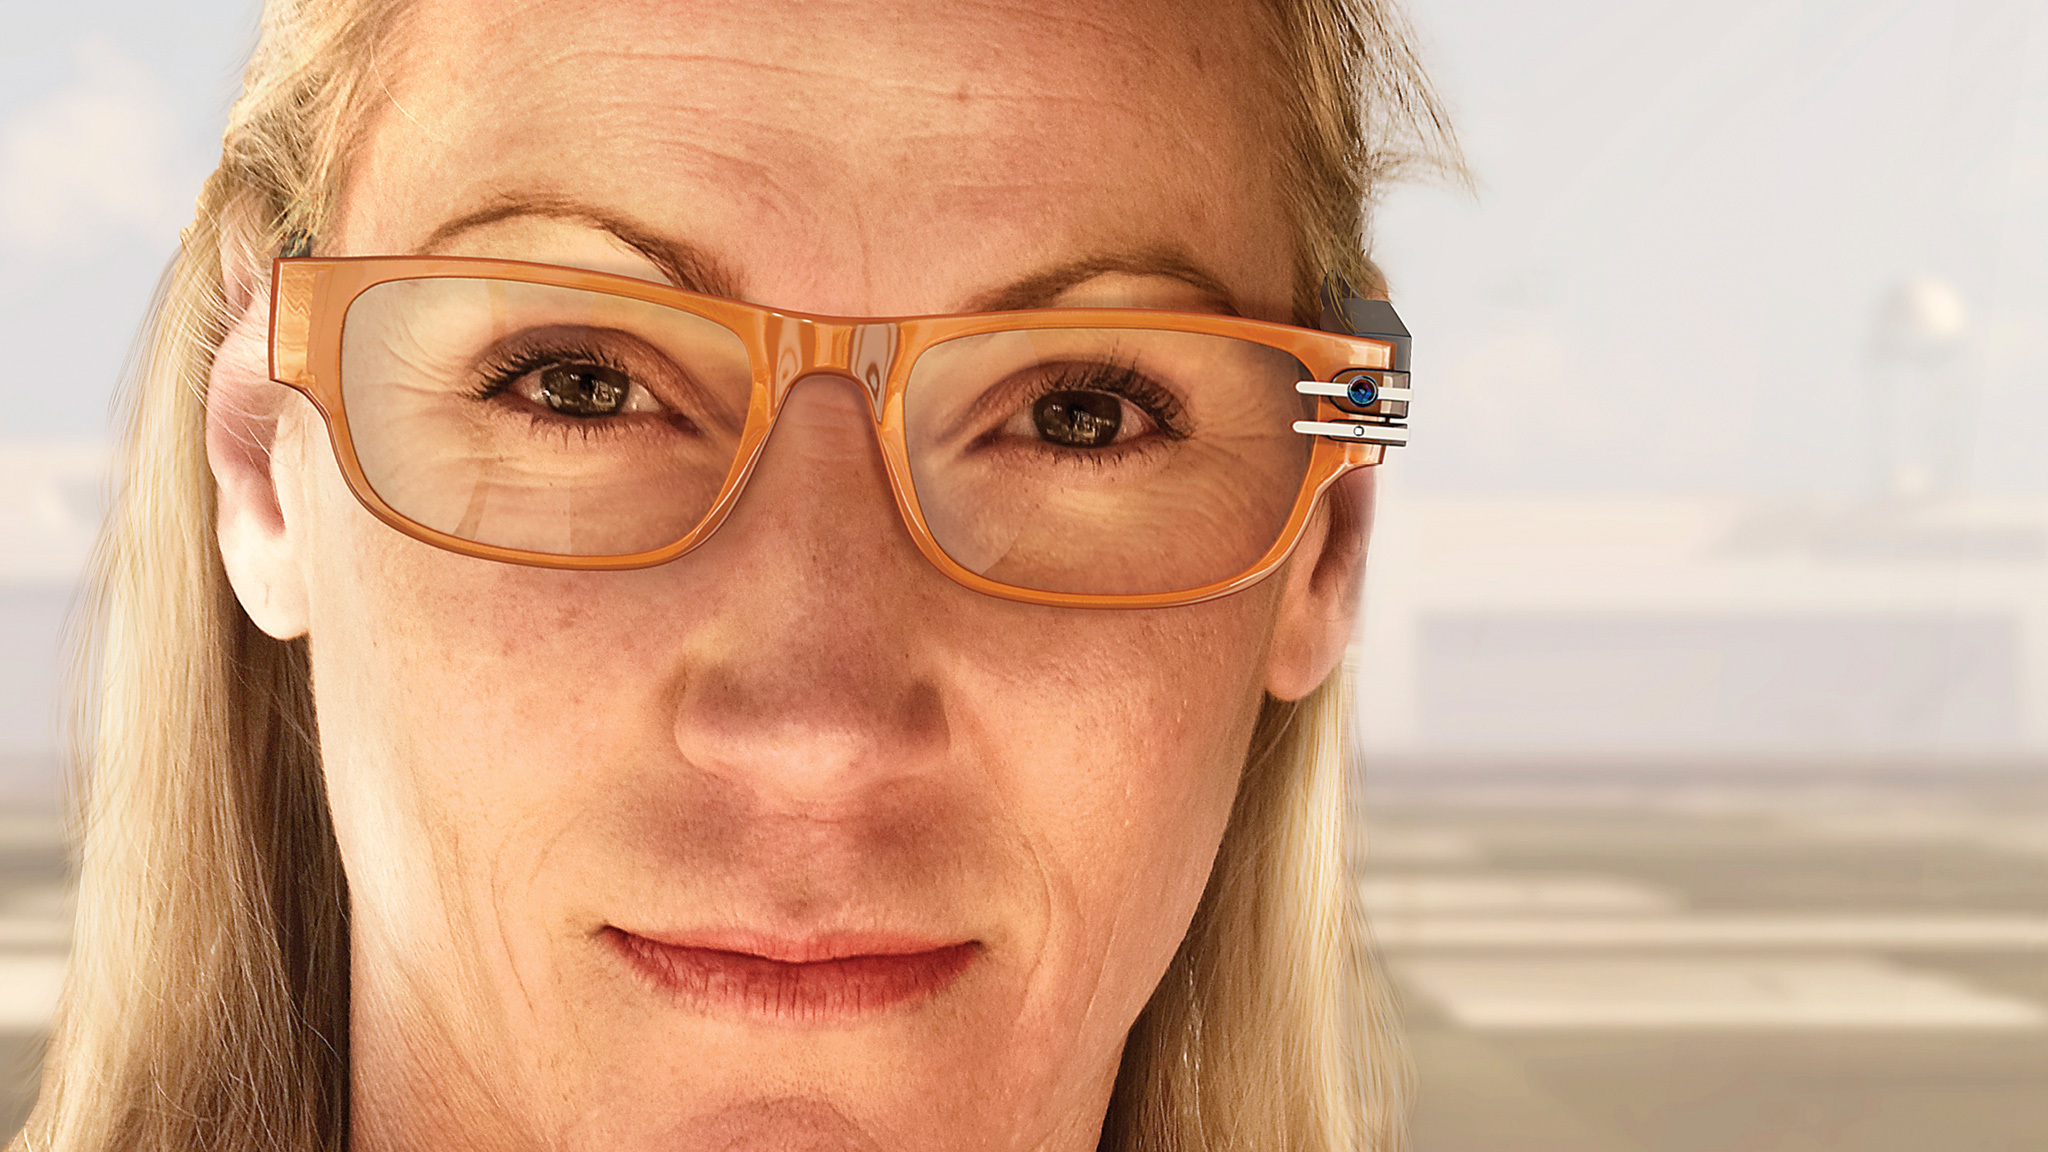 closeup of person wearing stylish glasses that include a camera